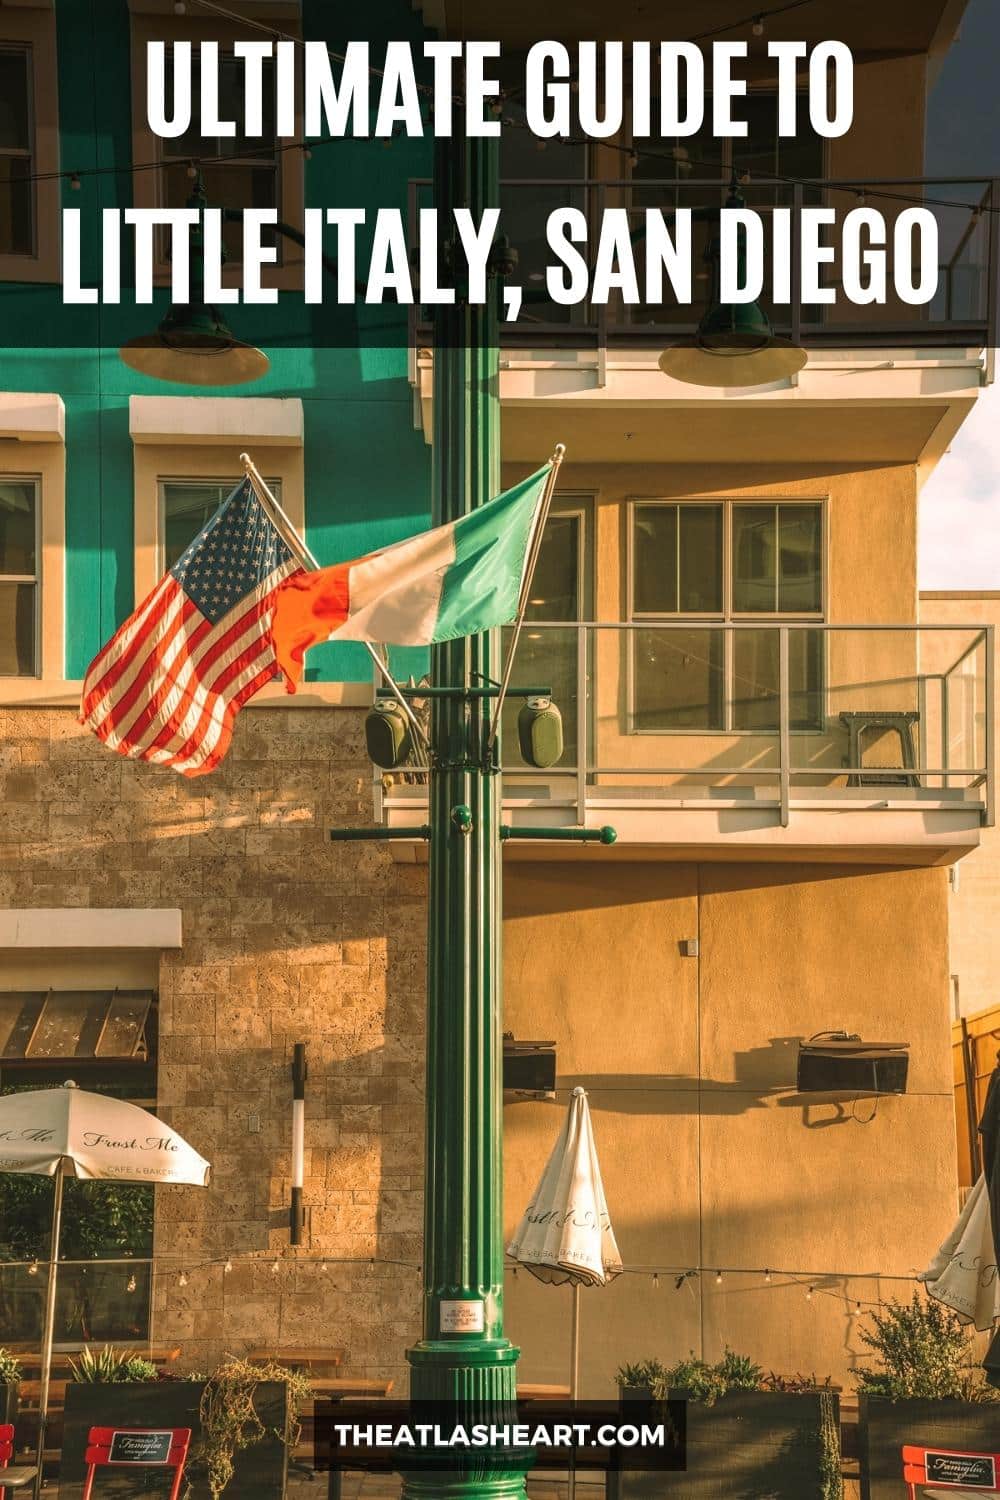 The Ultimate Guide to Little Italy, San Diego: Things to do, Restaurants, and Hotels